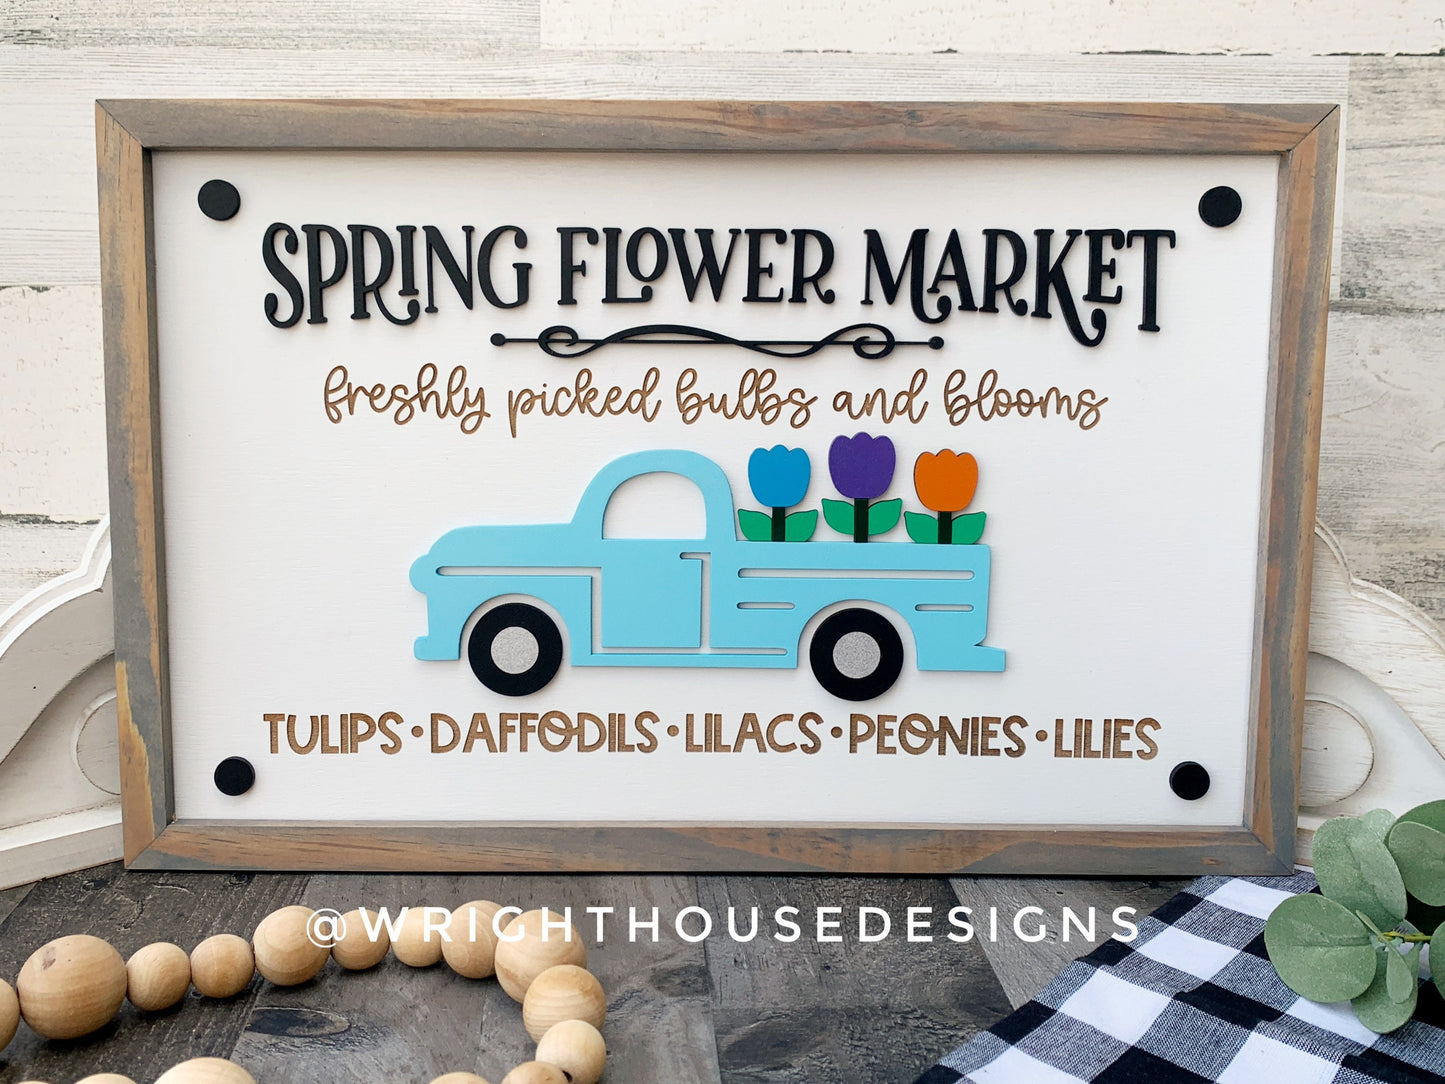 Spring Flower Market - Coffee Bar Sign - Seasonal Farmhouse Home and Kitchen Decor - Handcrafted Wooden Frame Wall Art - Easter Decorations